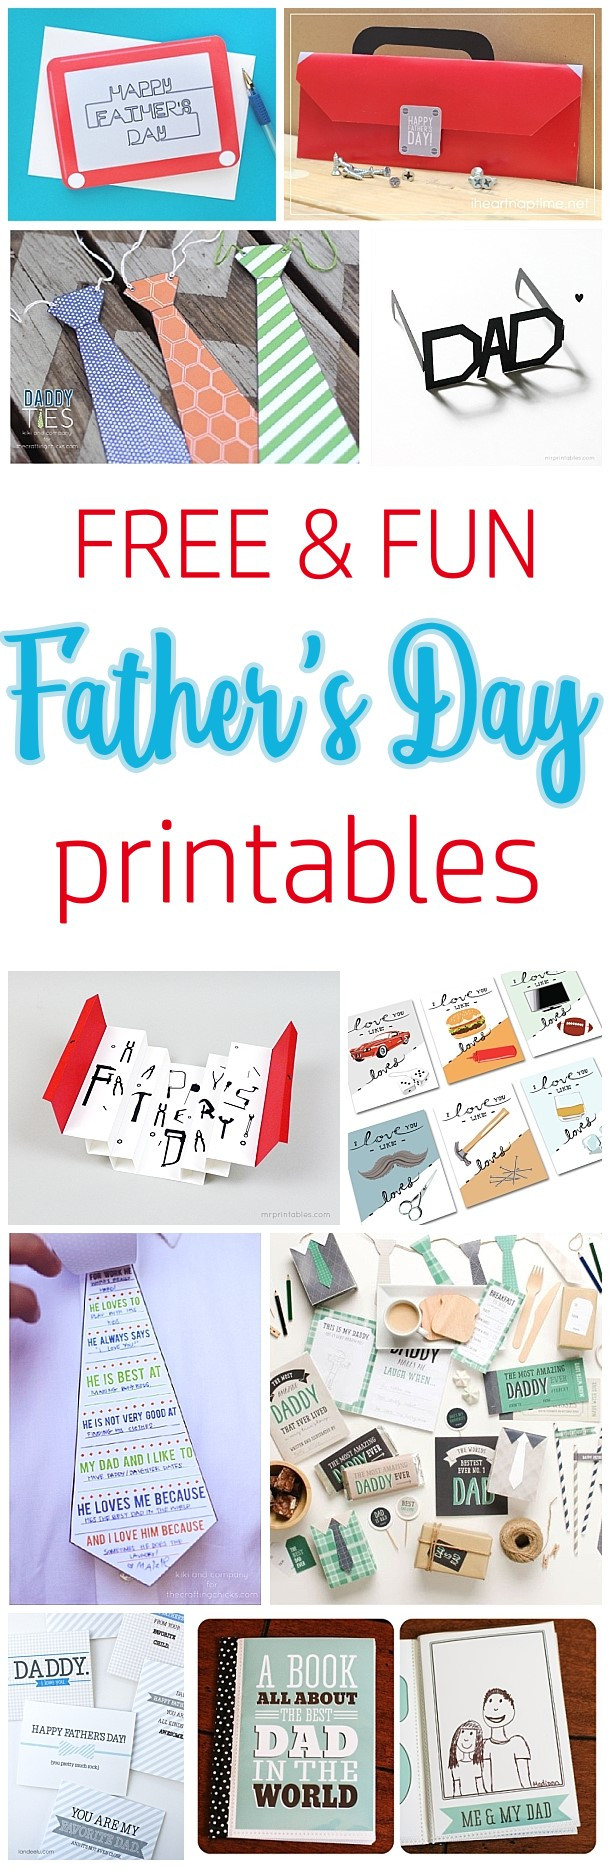 Printable Fathers Day Craft
 DIY Father’s Day Cards The Best FREE Printable Paper